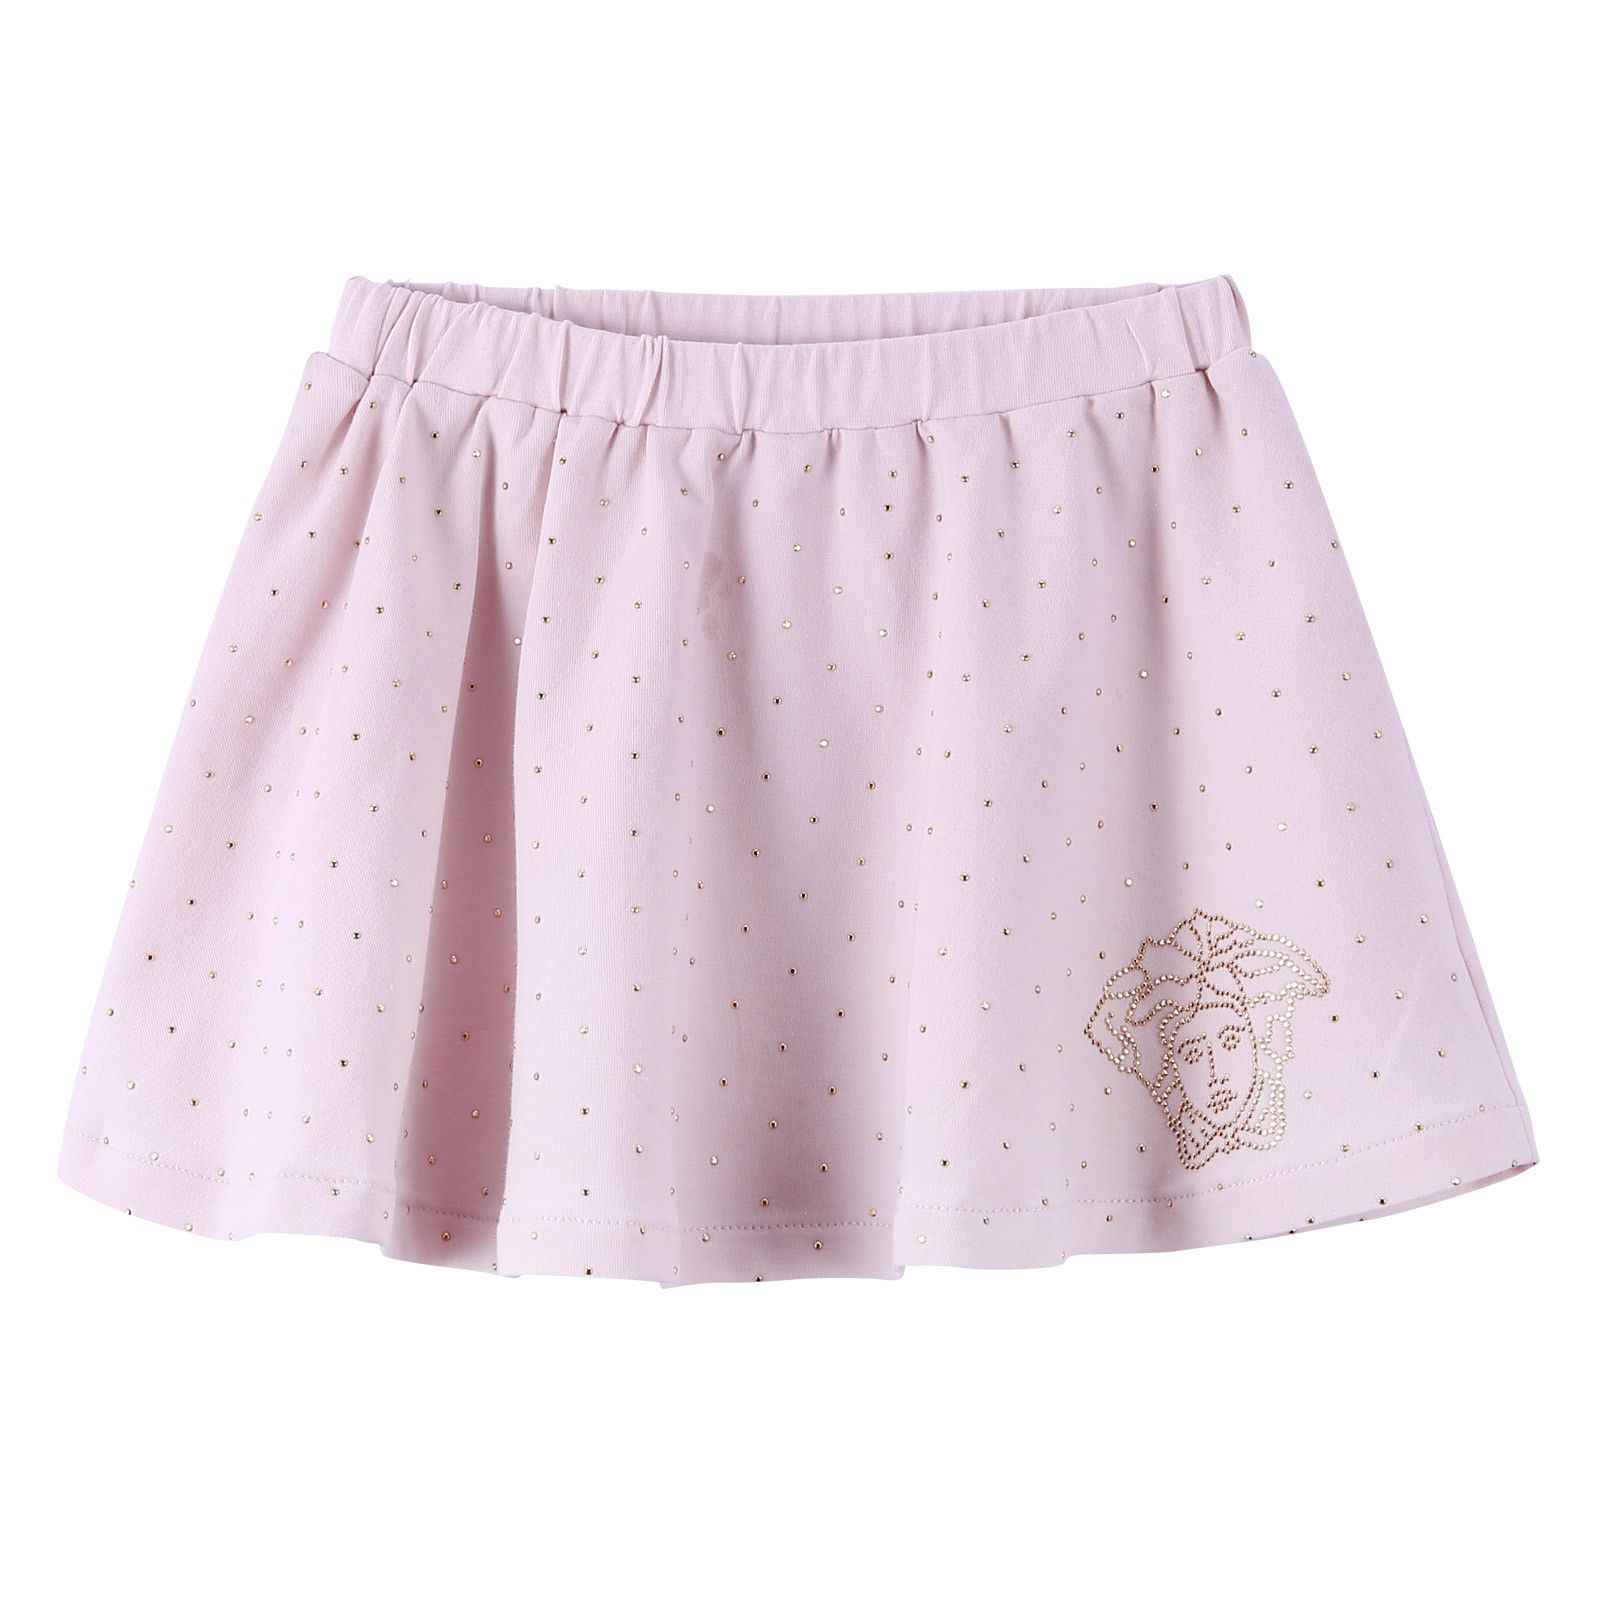 Baby Girls Pink Cotton Skirt With Gold Spot Trims - CÉMAROSE | Children's Fashion Store - 1